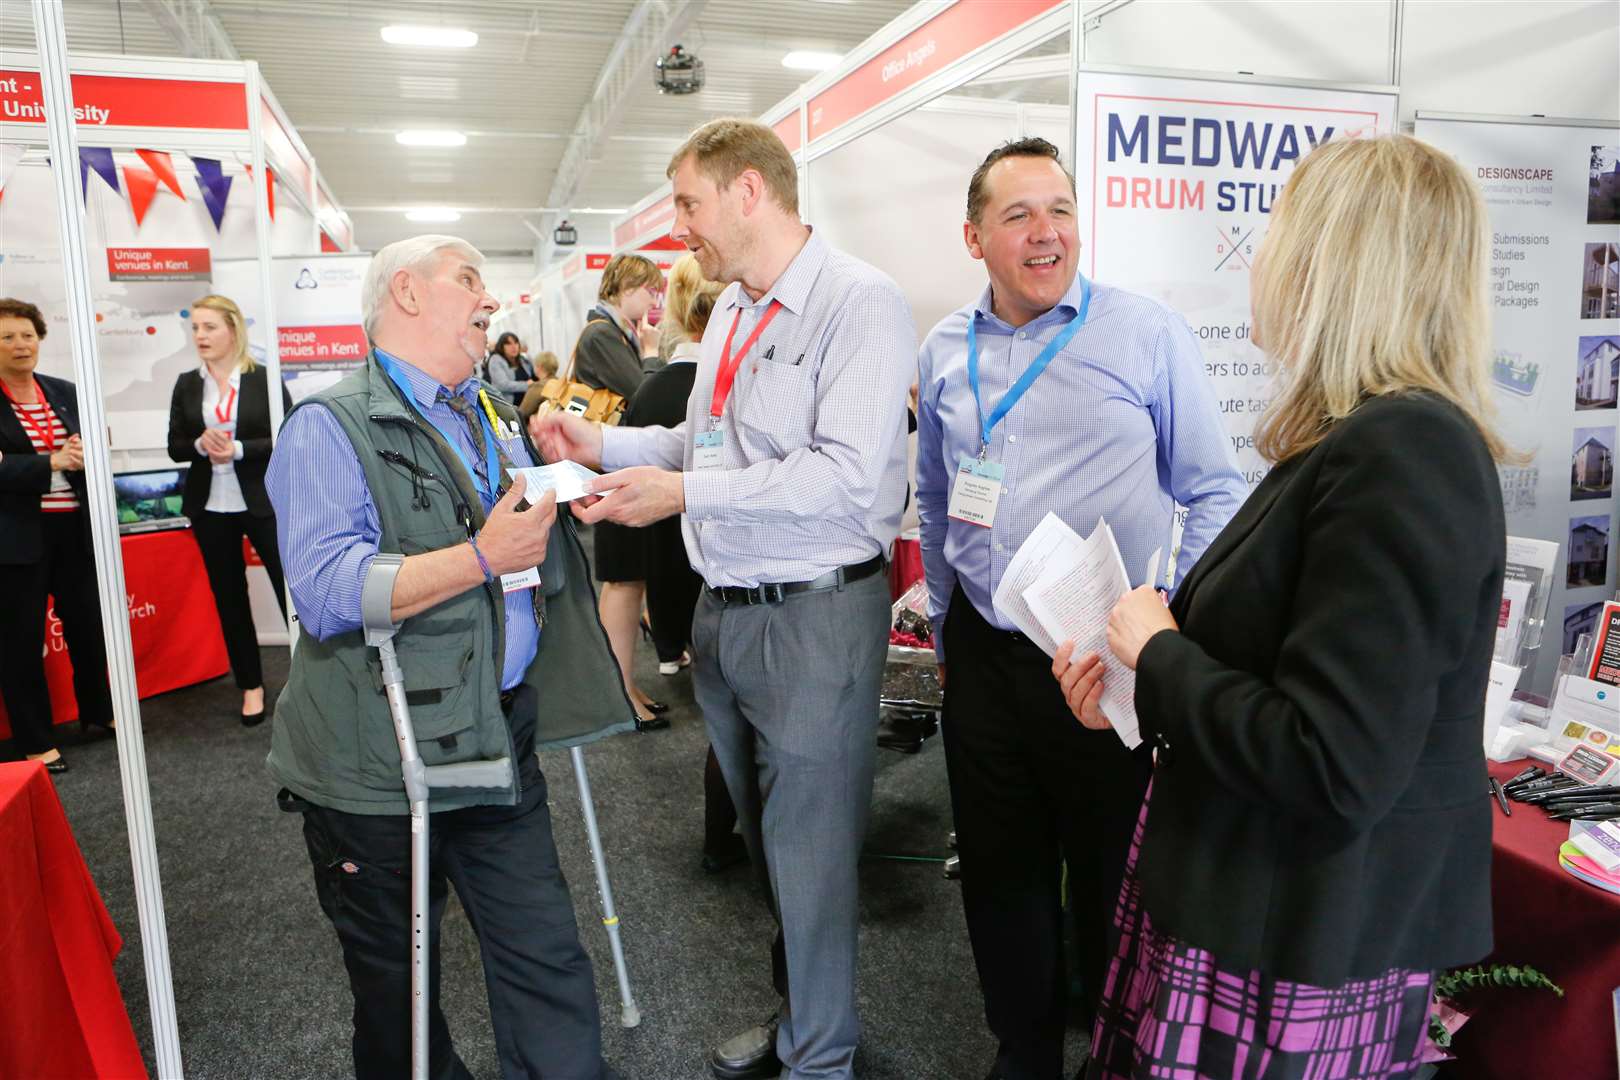 More than 3,200 people will visit the Kent 2020 Vision Live business exhibition in Detling